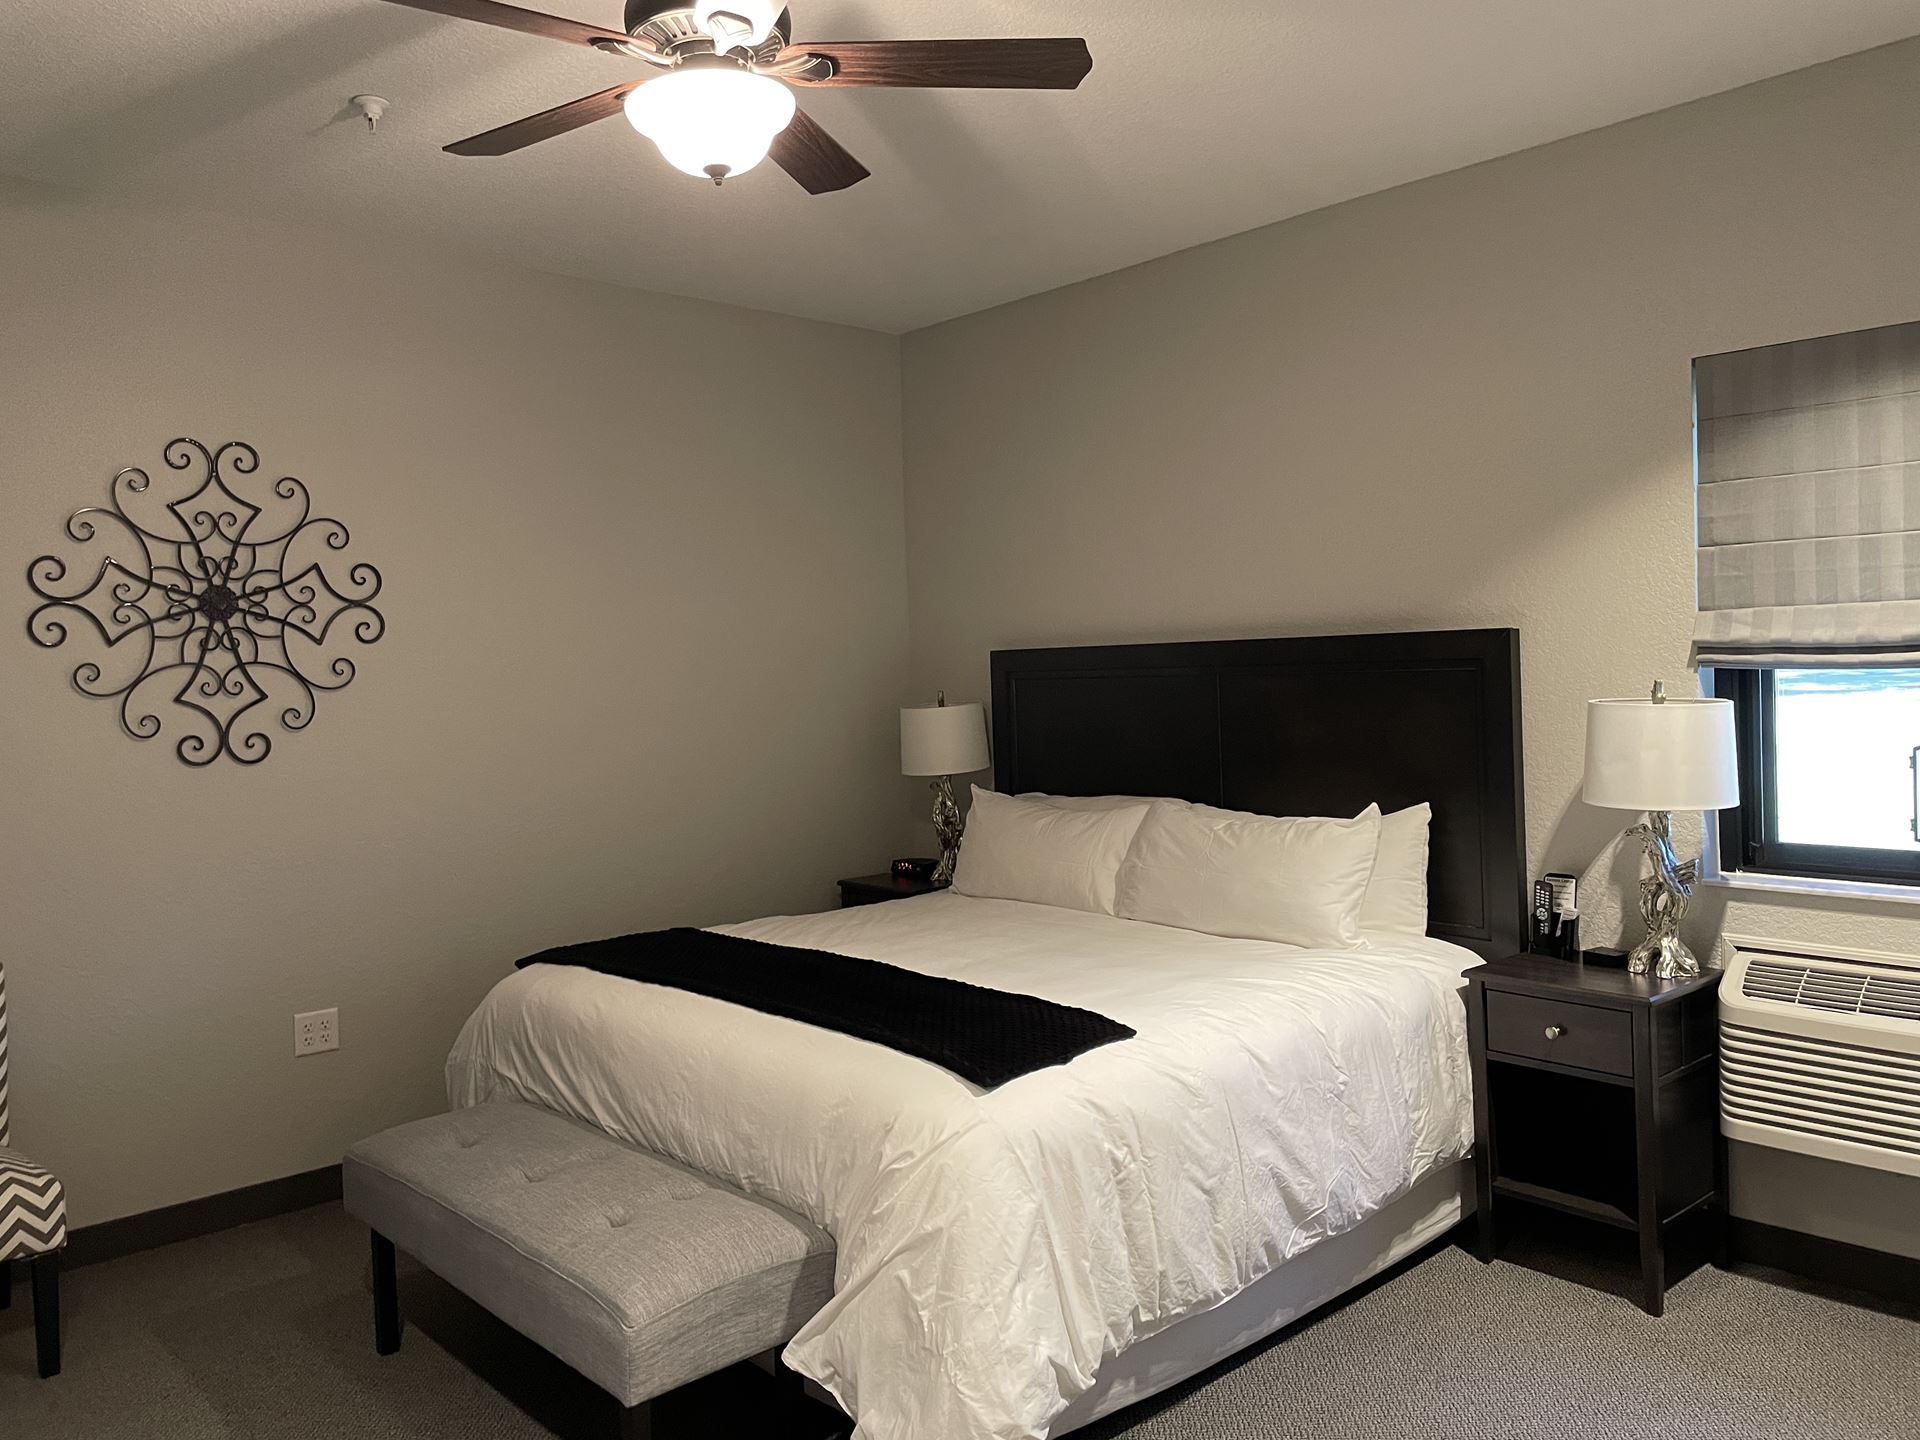 a bed with nightstand and ceiling fan